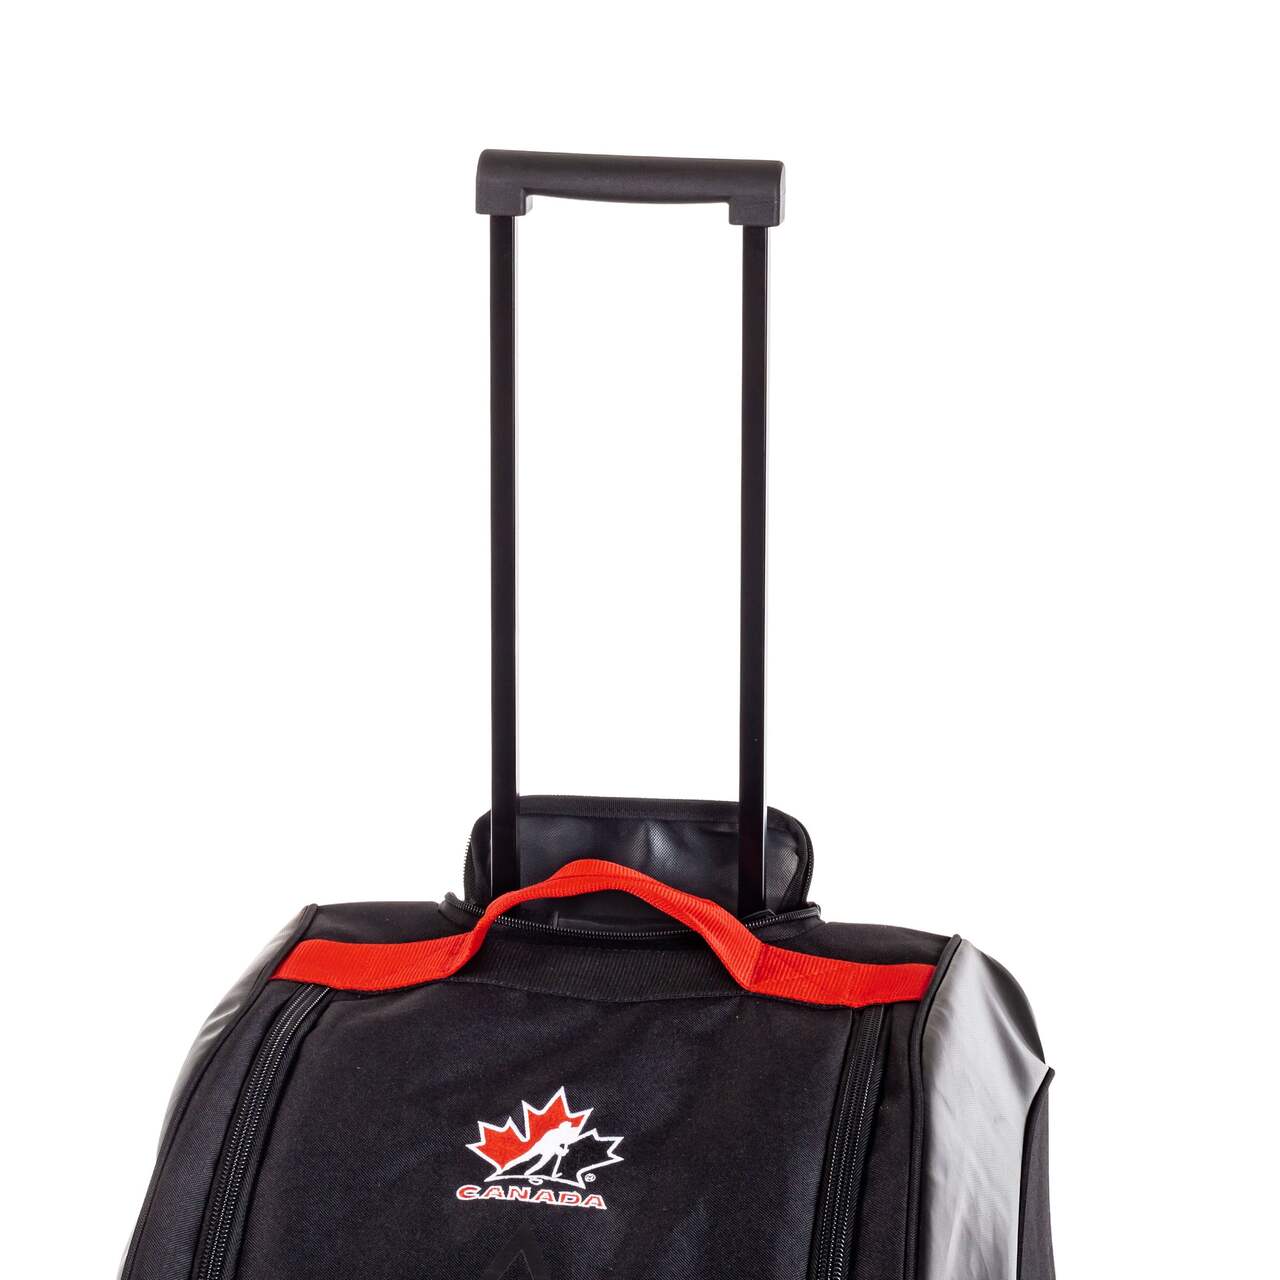 Sherwood Convertible Hockey Bag with Backpack Straps, Wheeled